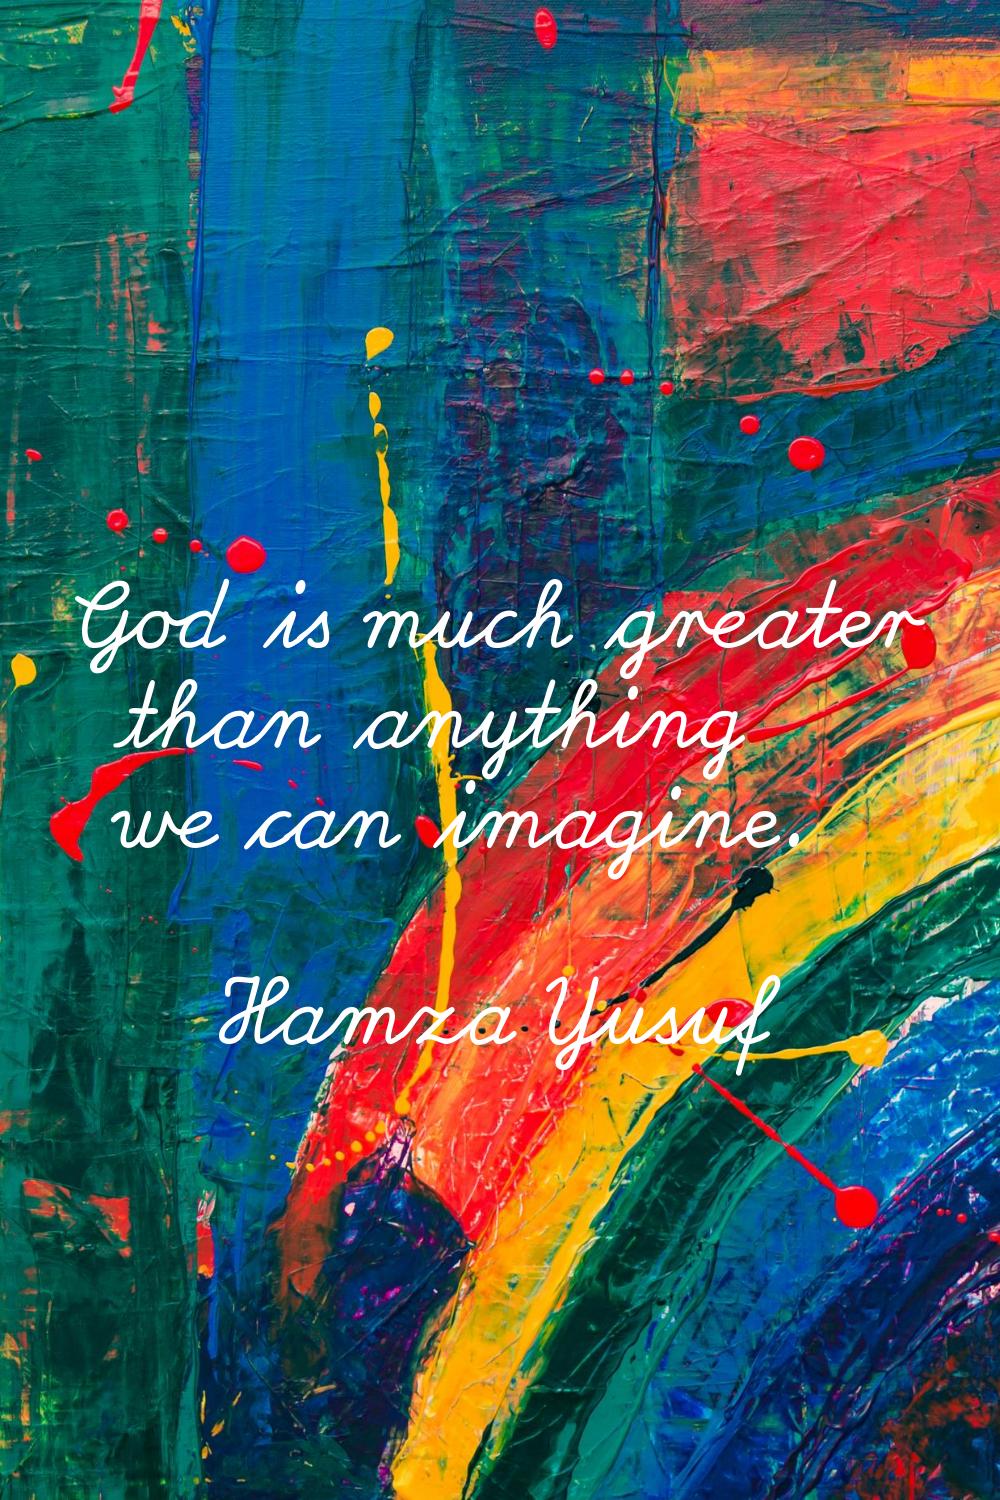 God is much greater than anything we can imagine.